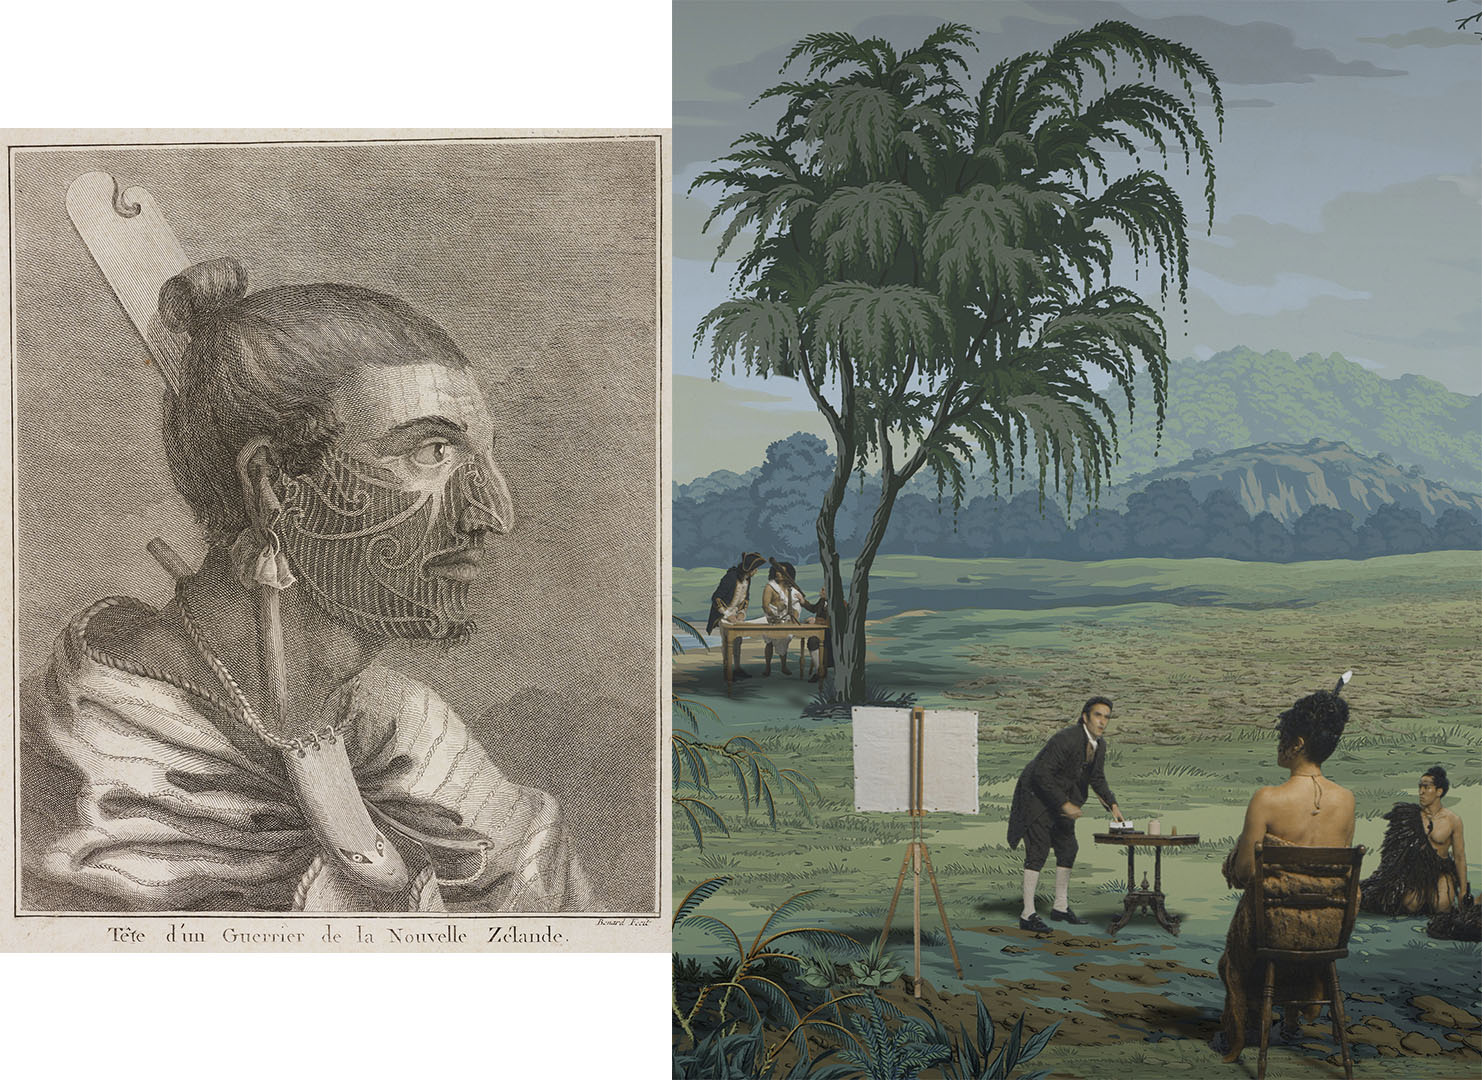 On the left is an illustration a man showing Tā moko, on the right in a still from in Pursuit of Venus [infected] shows a man posing for a portrait